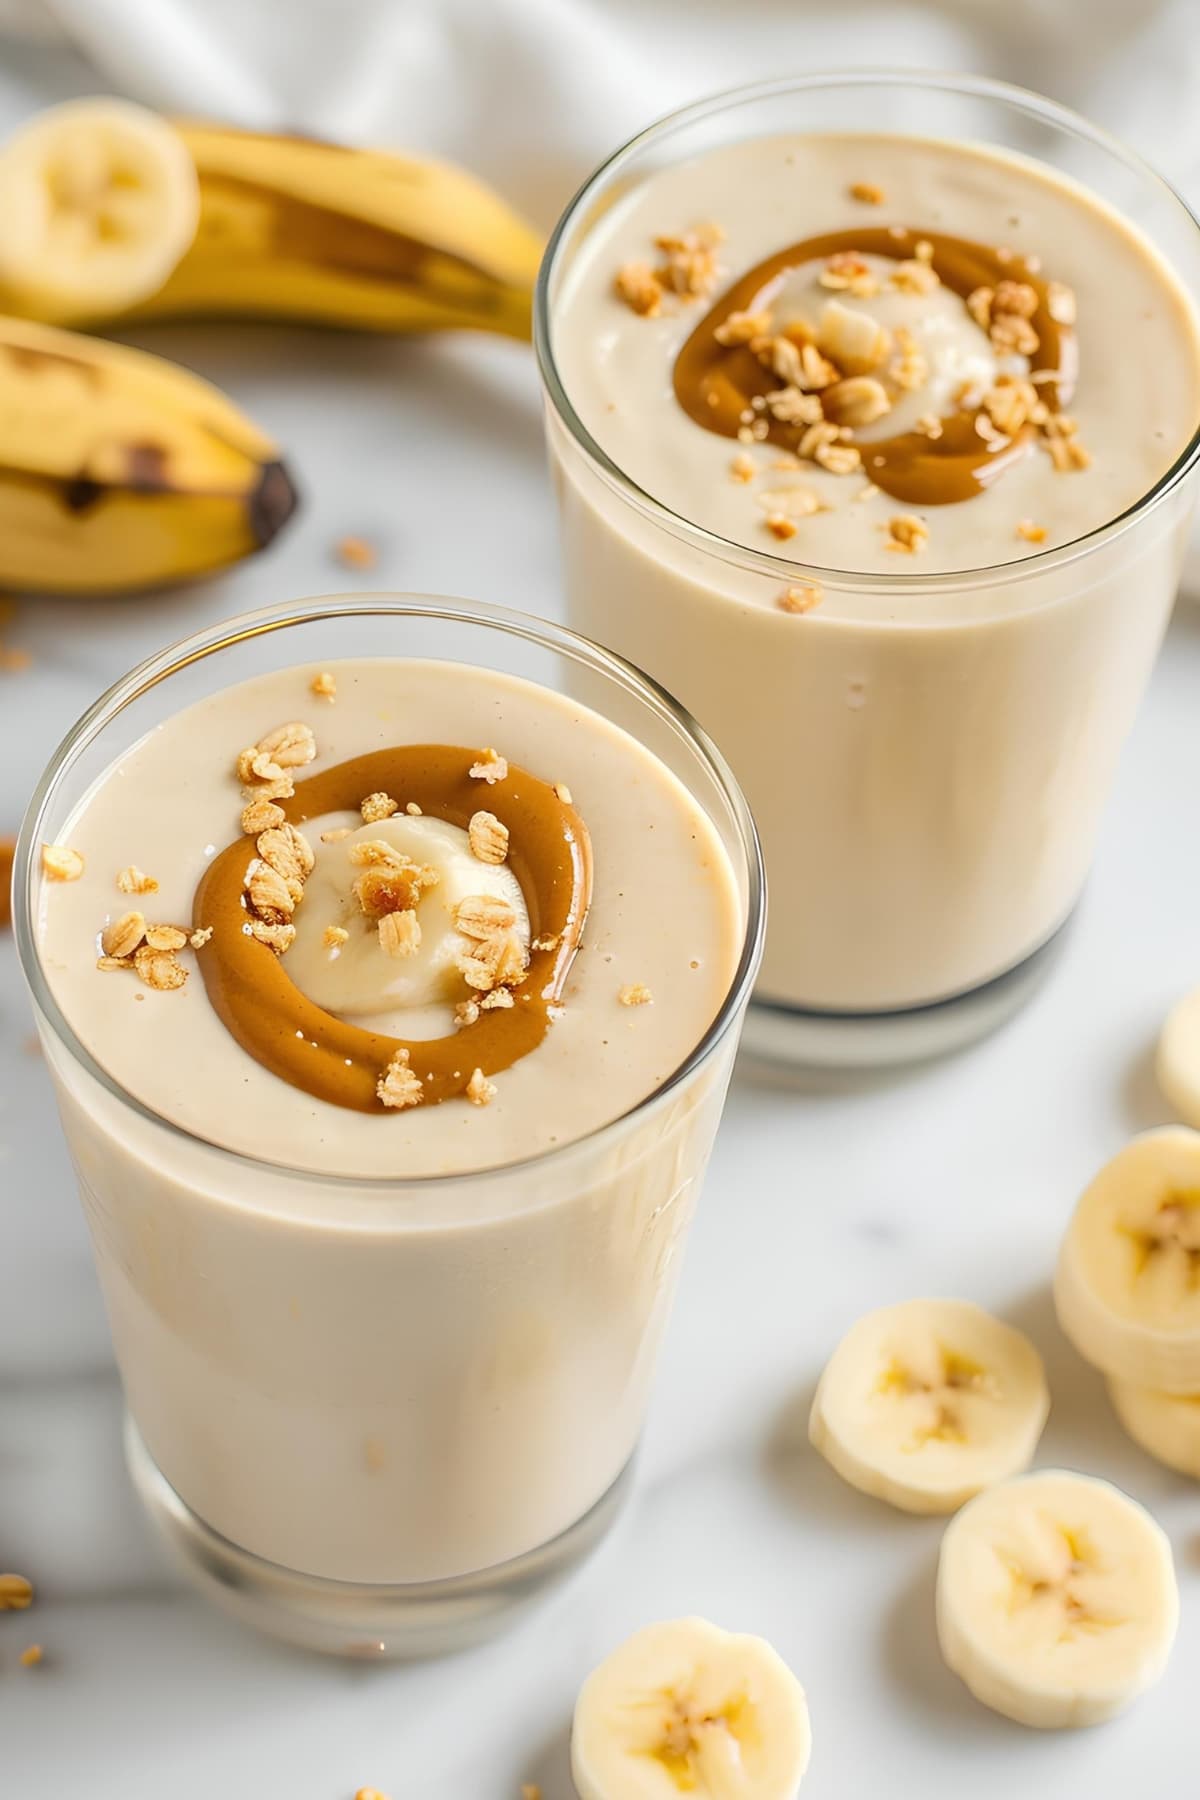 Two glasses of smoothie with bananas and peanut butter